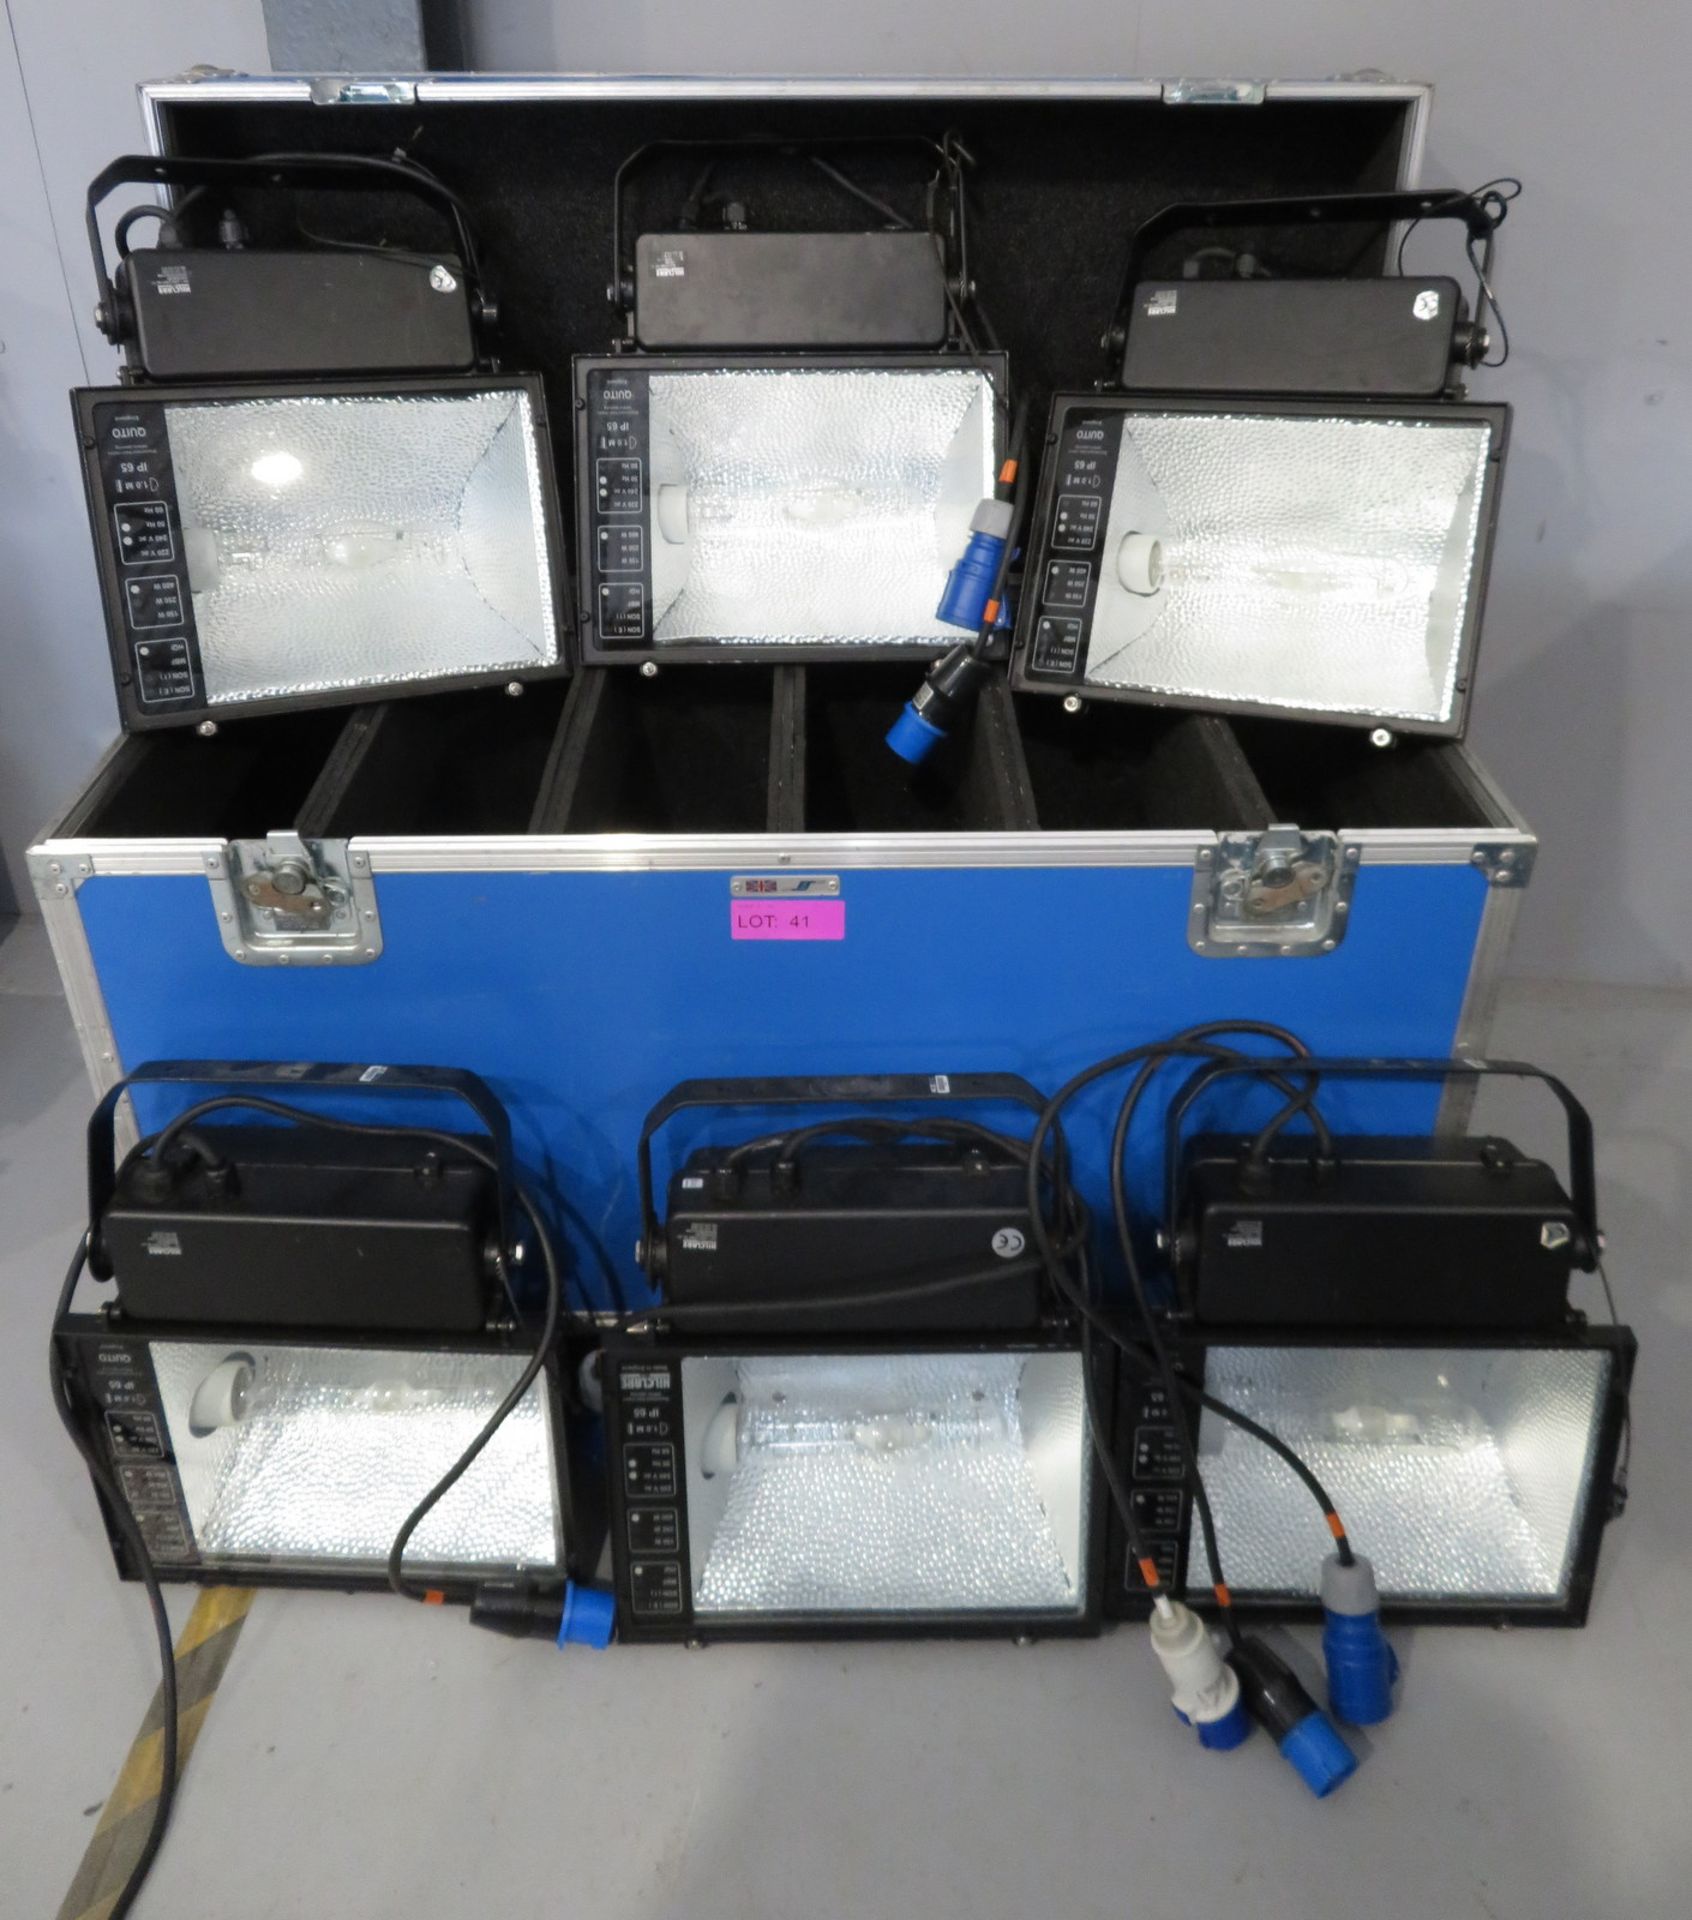 6x HQI 400w Floodlights in flight case. Includes safety bonds. Working condition.